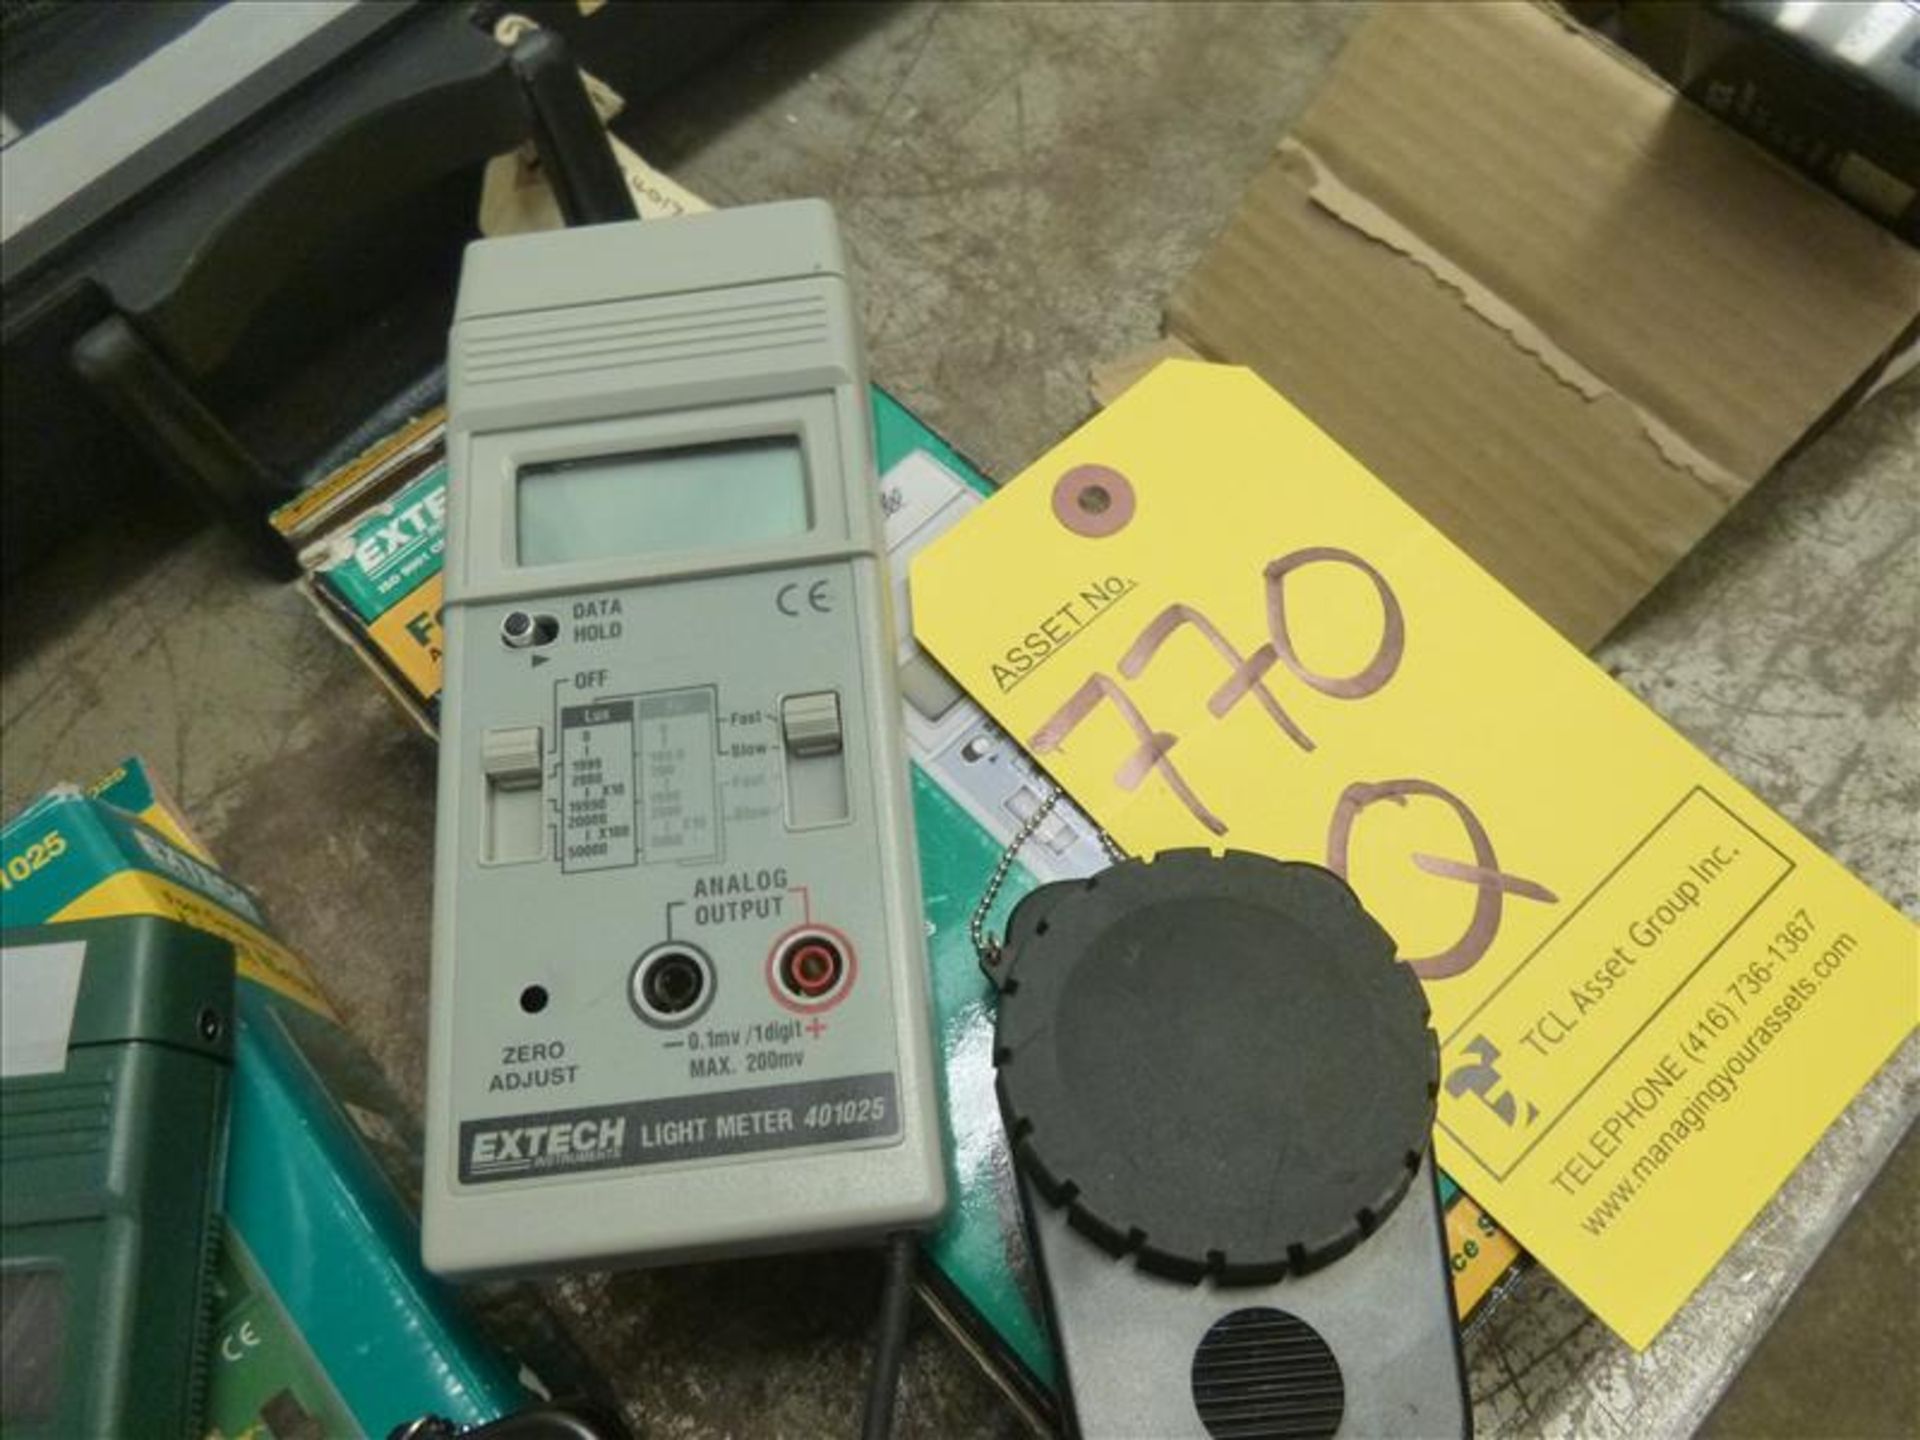 Extech light meter mod. 401025 (located at 150 Bartor Rd Toronto ON Canada)